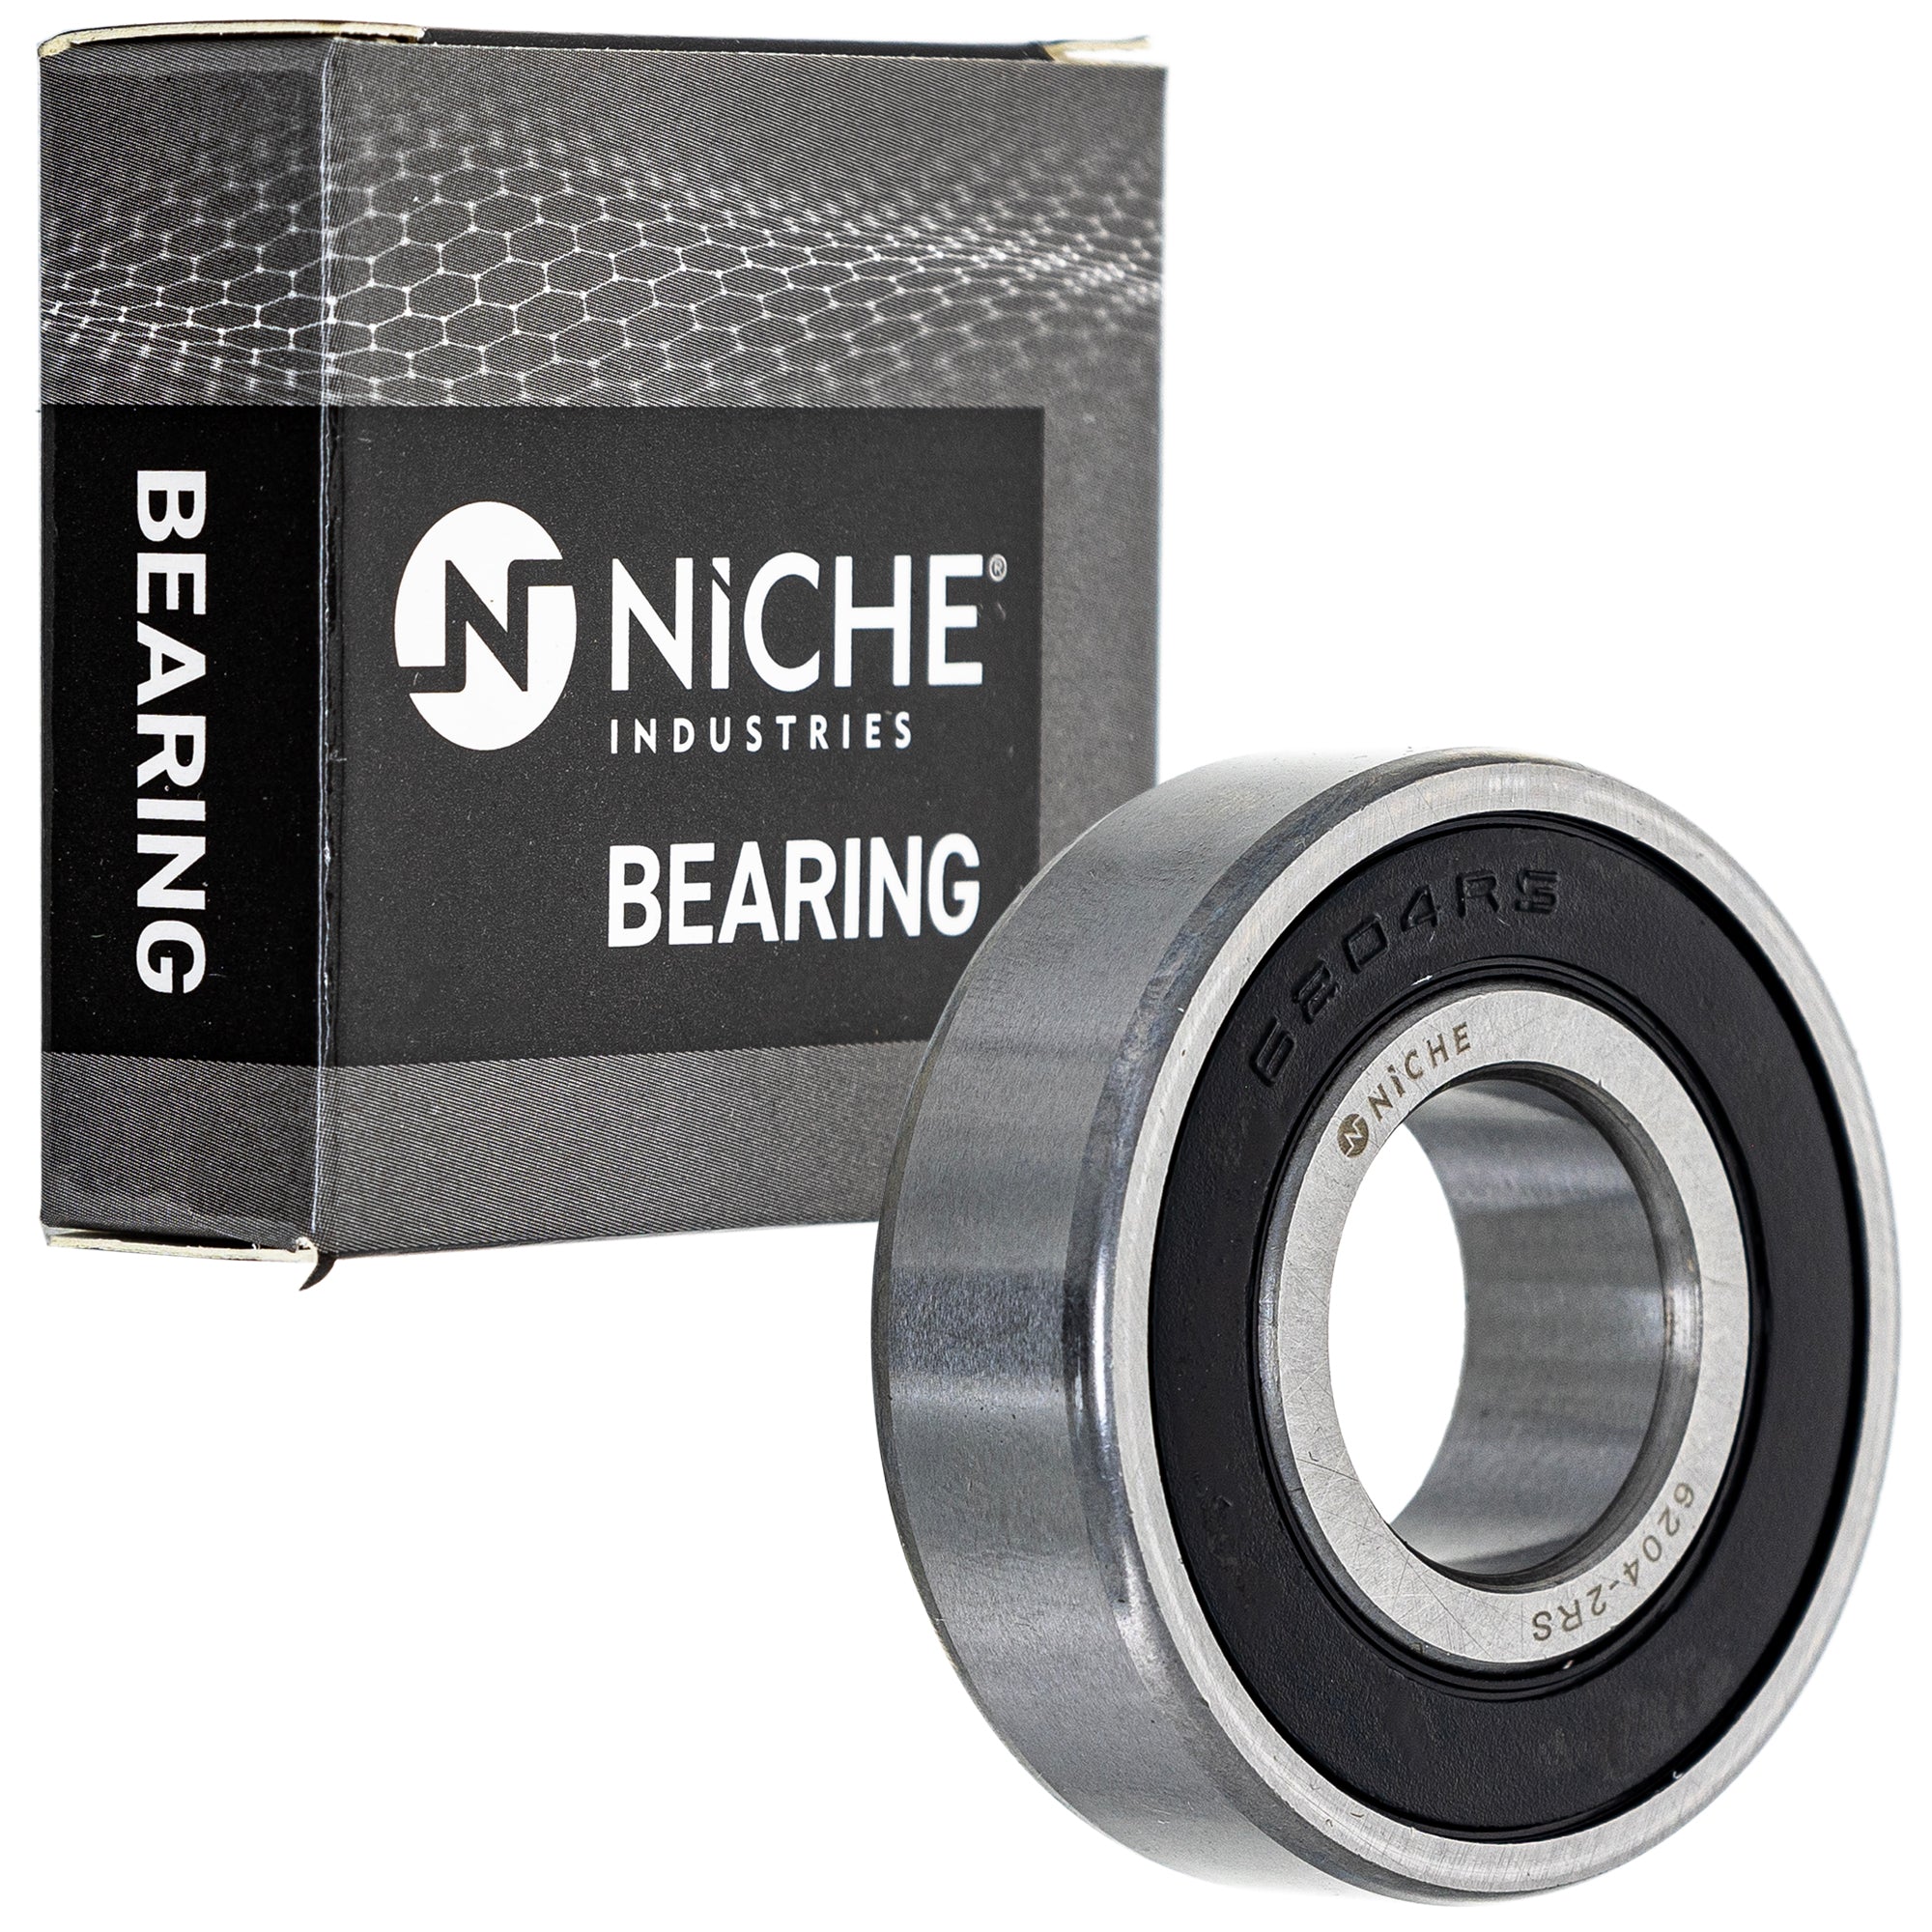 NICHE 519-CBB2229R Bearing & Seal Kit 10-Pack for zOTHER Snapper